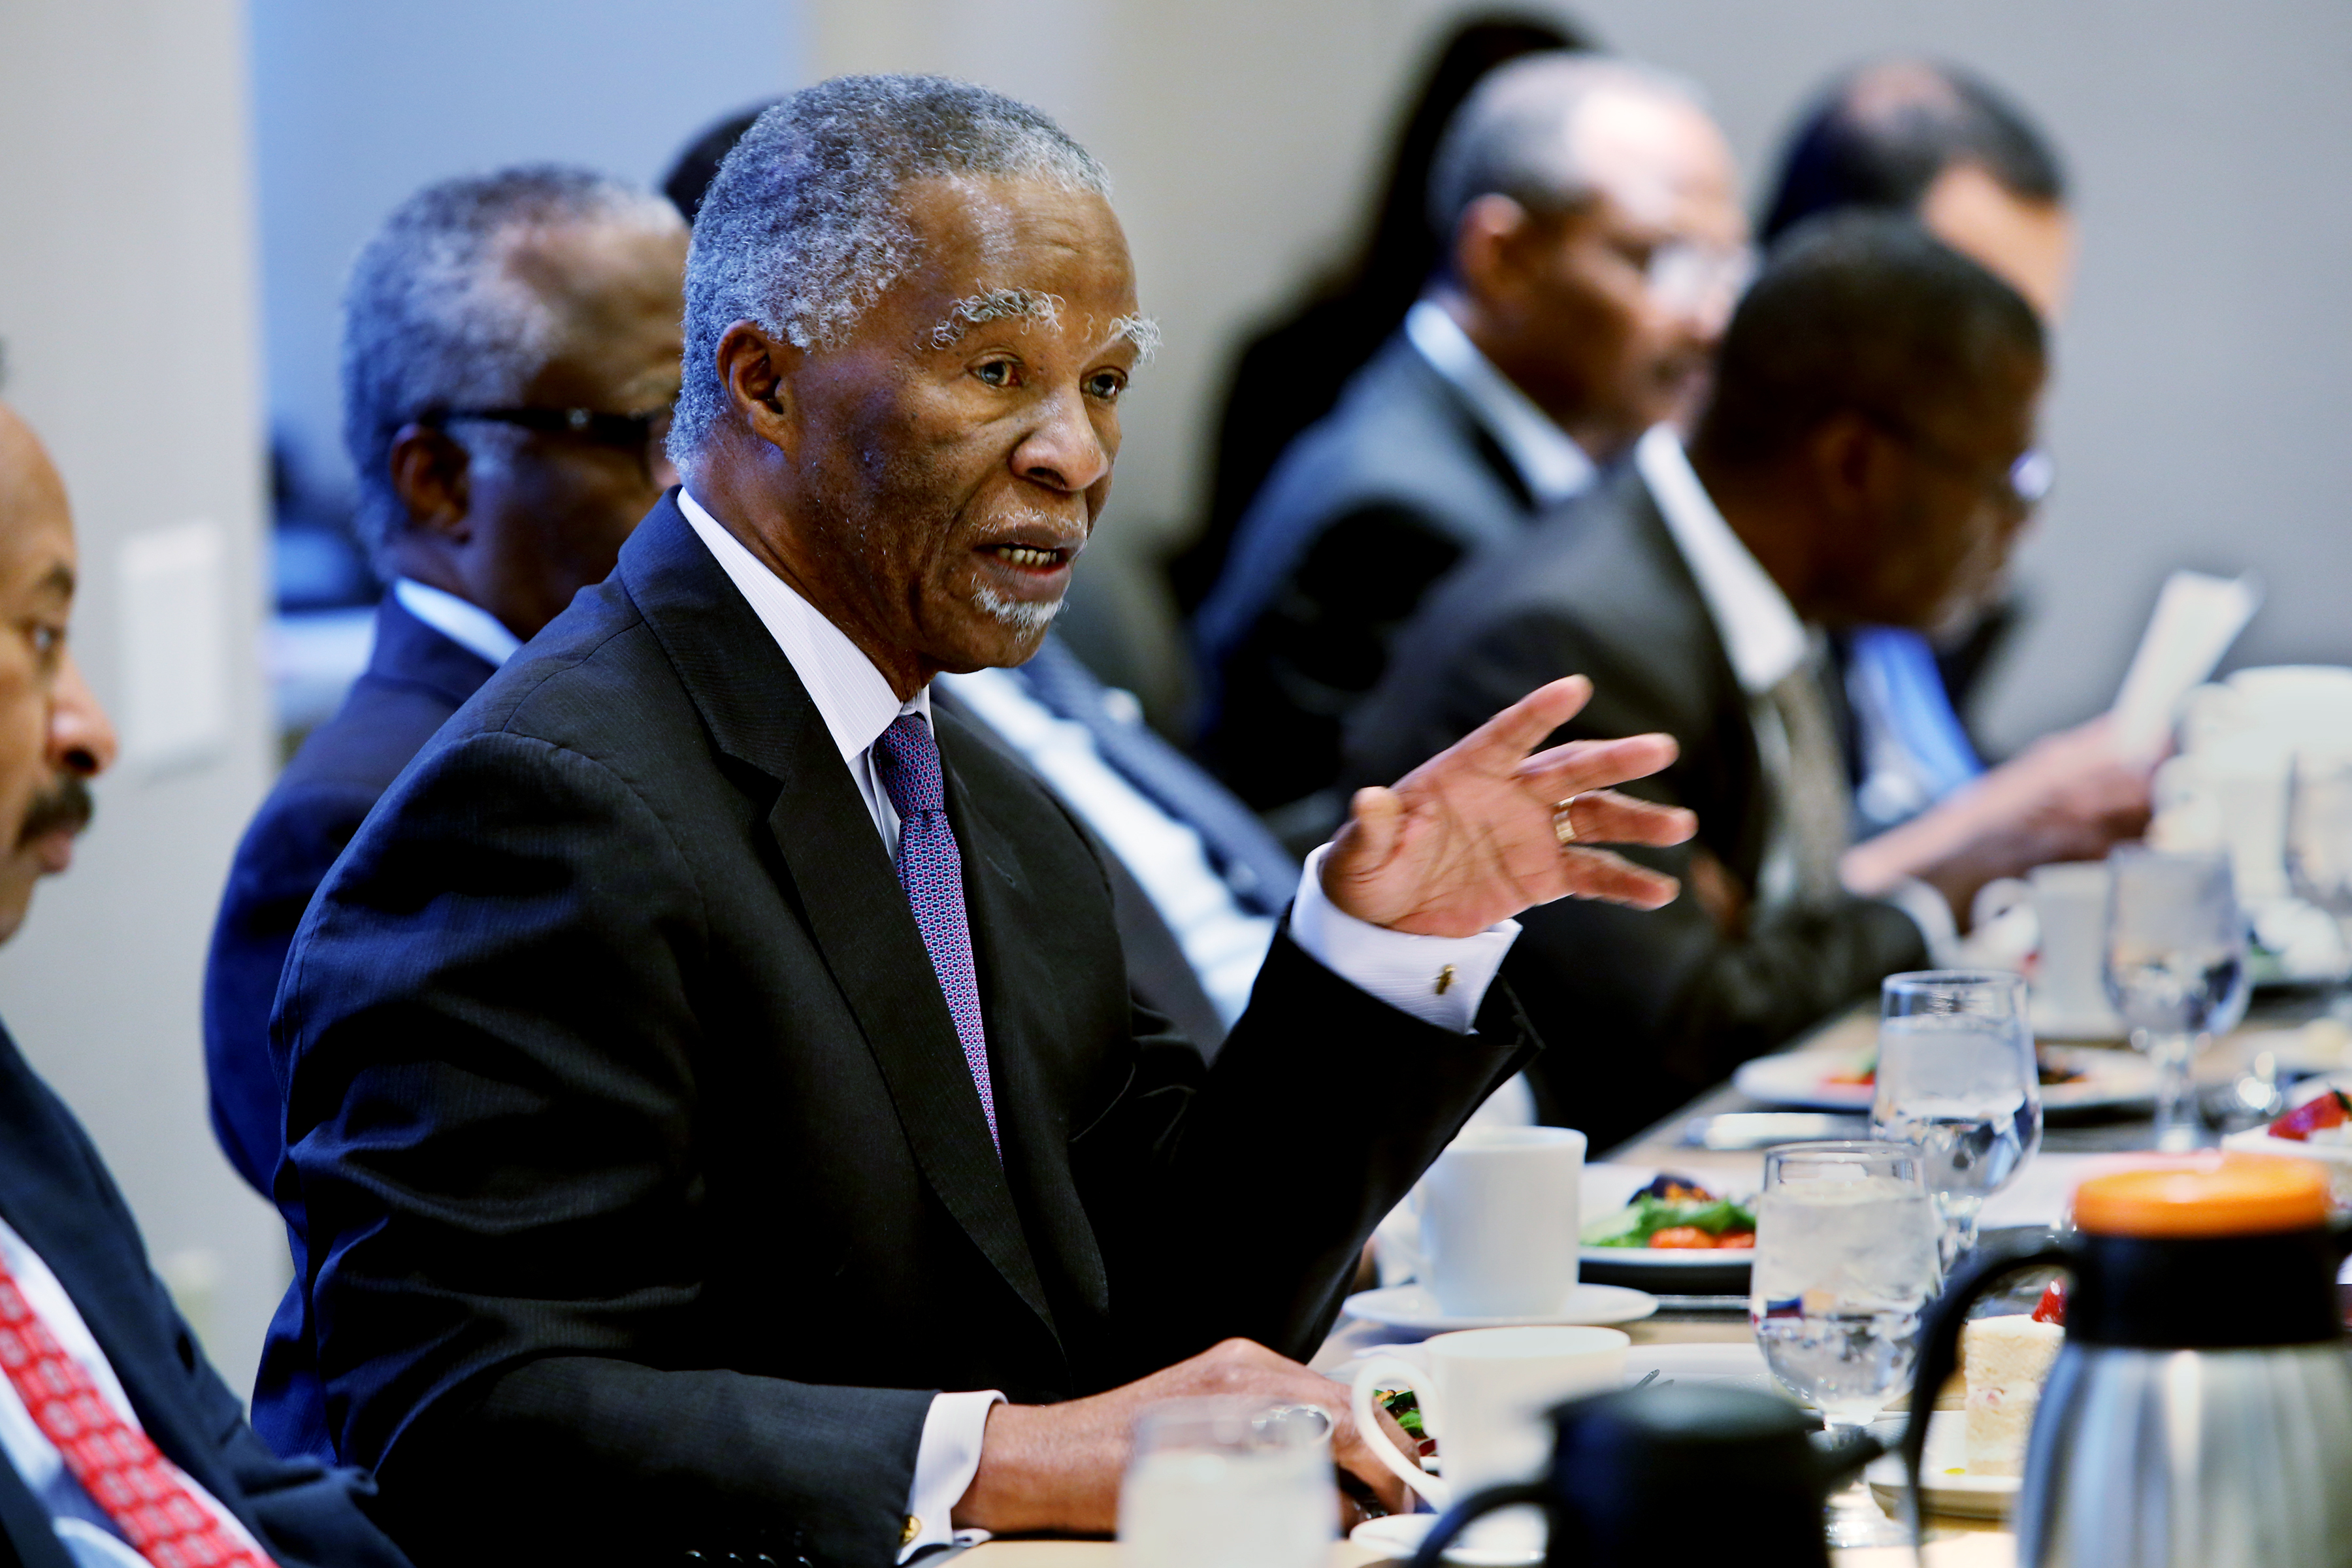 High-Level Panel Chairperson and former President Thabo Mbeki of South Africa discusses some of the findings of the Panel’s report.